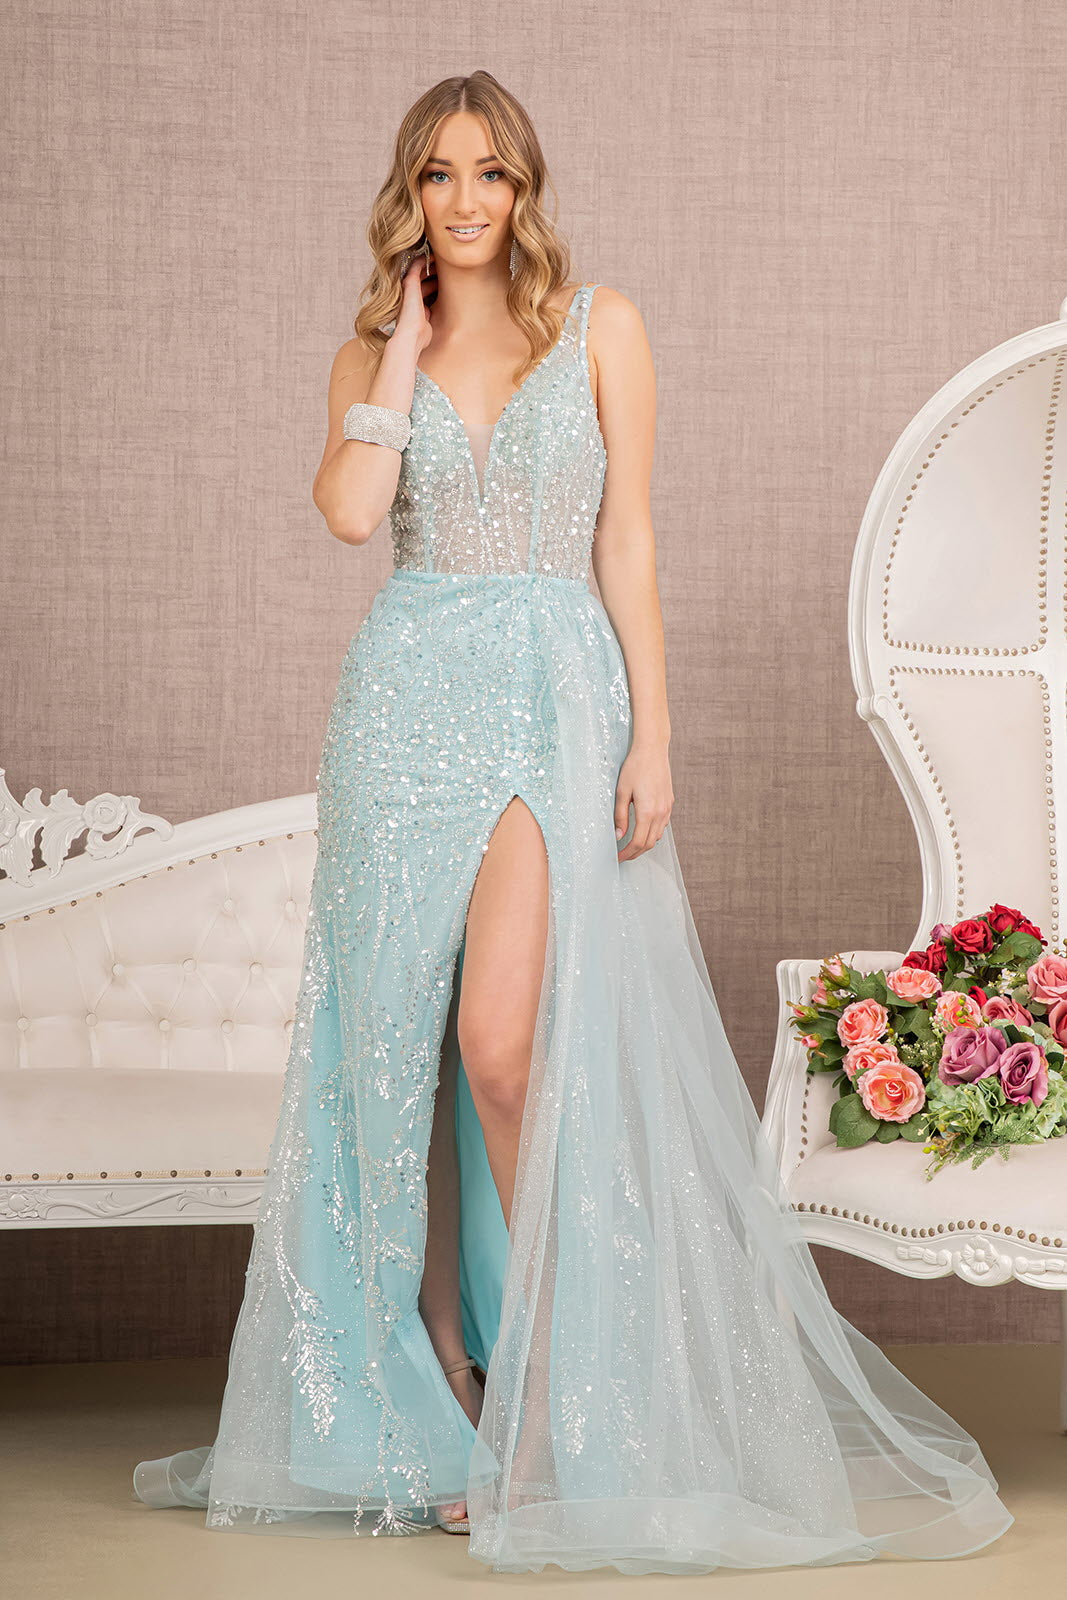 Baby Blue Illusion Sweetheart Mermaid Slit Dress GL3119 - Women Formal Dress - Special Occasion-Curves